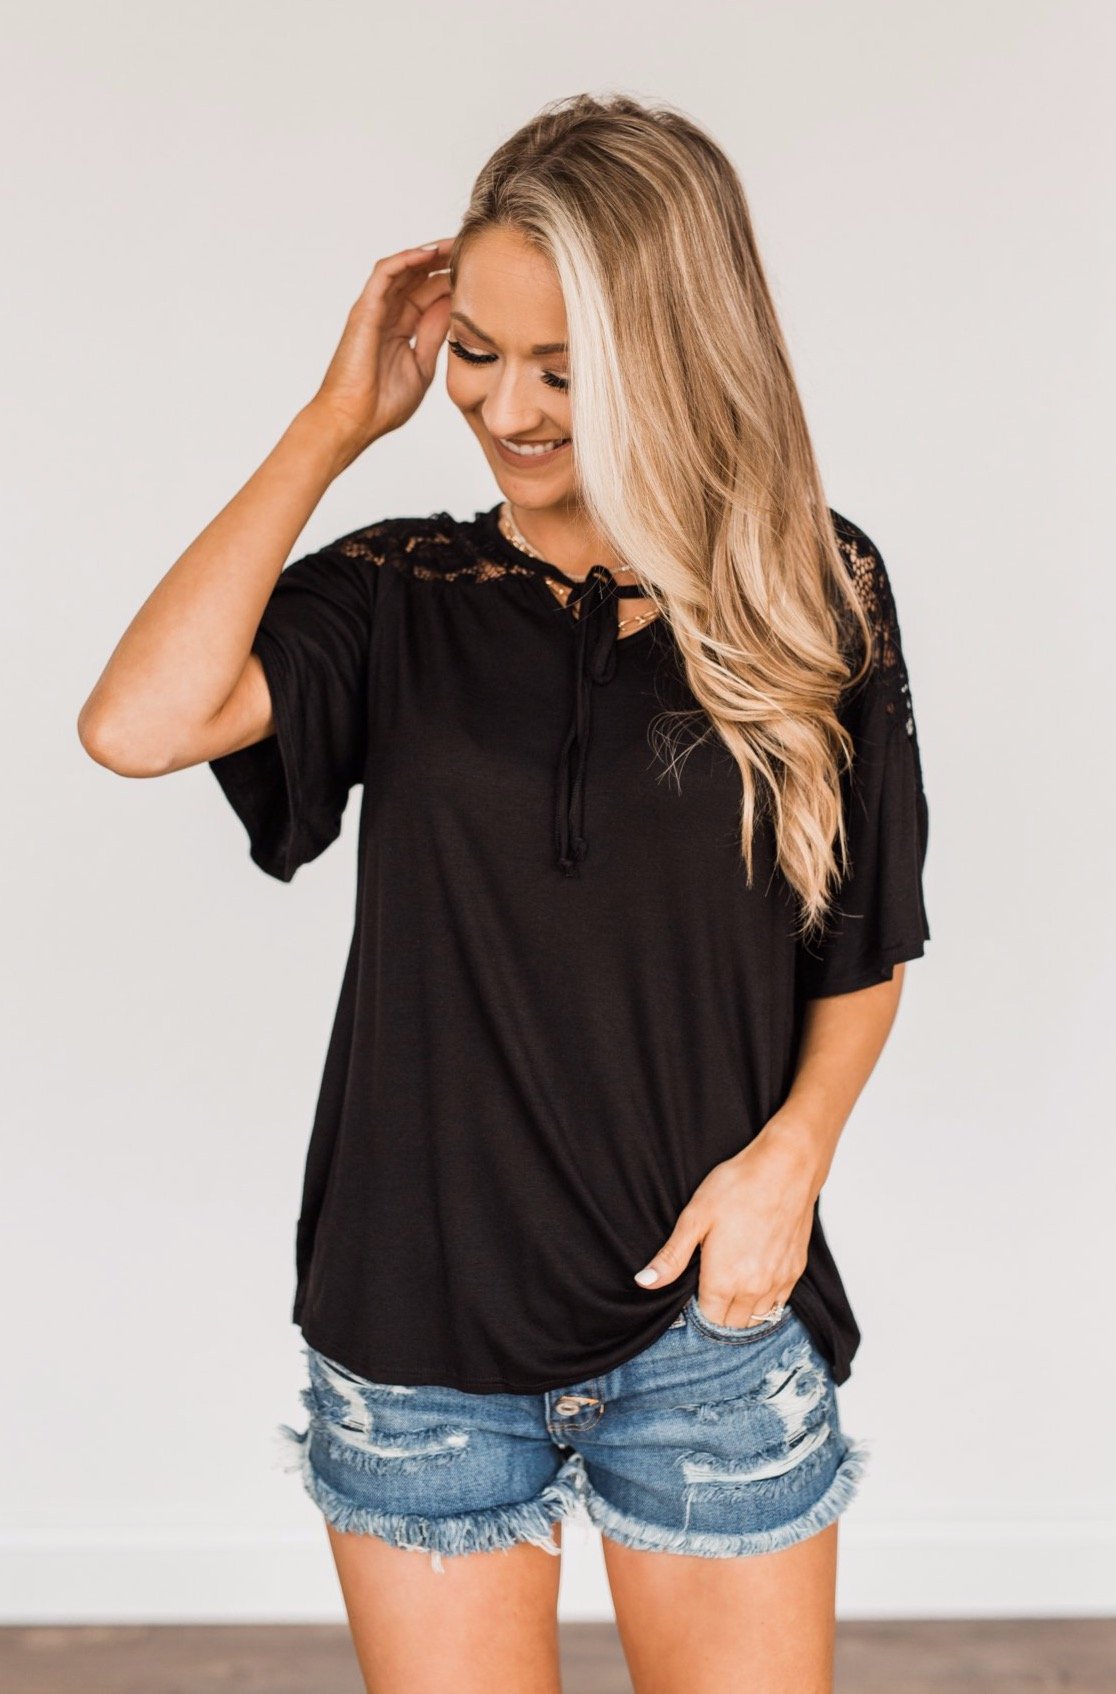 Counting My Blessings Lace Top- Black